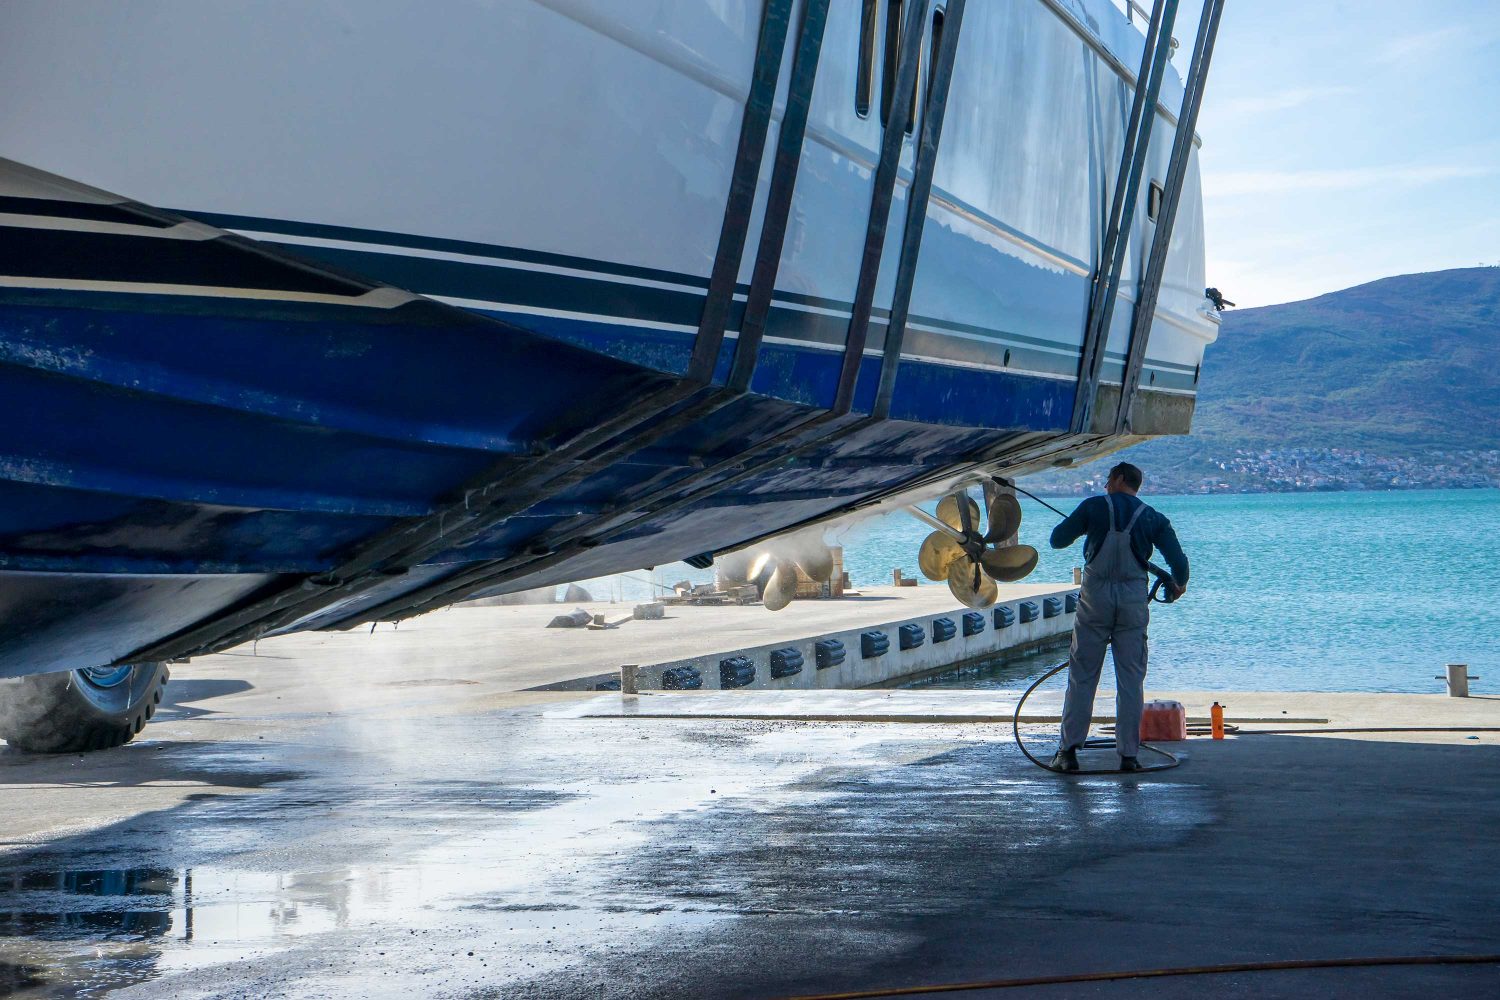 Montenegro, Tivat, October 30 2017. Man is working at the Navar Boatyard. He is using a pressure washer to clean the bottom of the boat while it is in dry dock. He is removing barnacles from the prop and shaft. Boats need routine cleaning and maintenance.